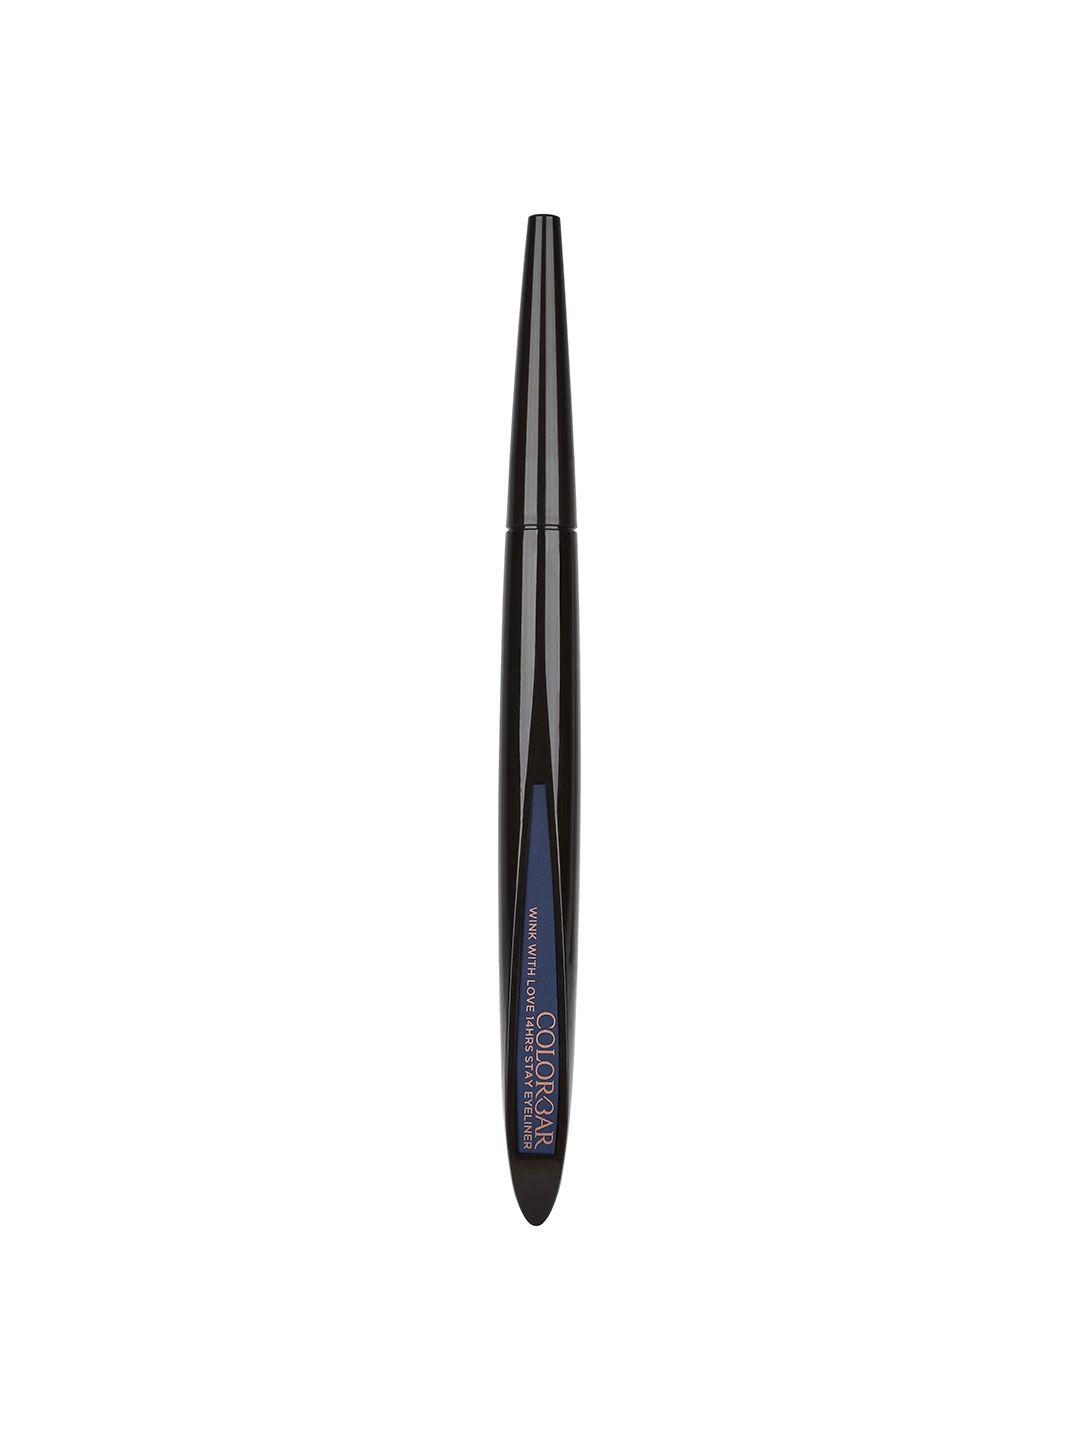 colorbar x jacqueline wink with love 14hrs stay eyeliner 1 ml - navy night 003